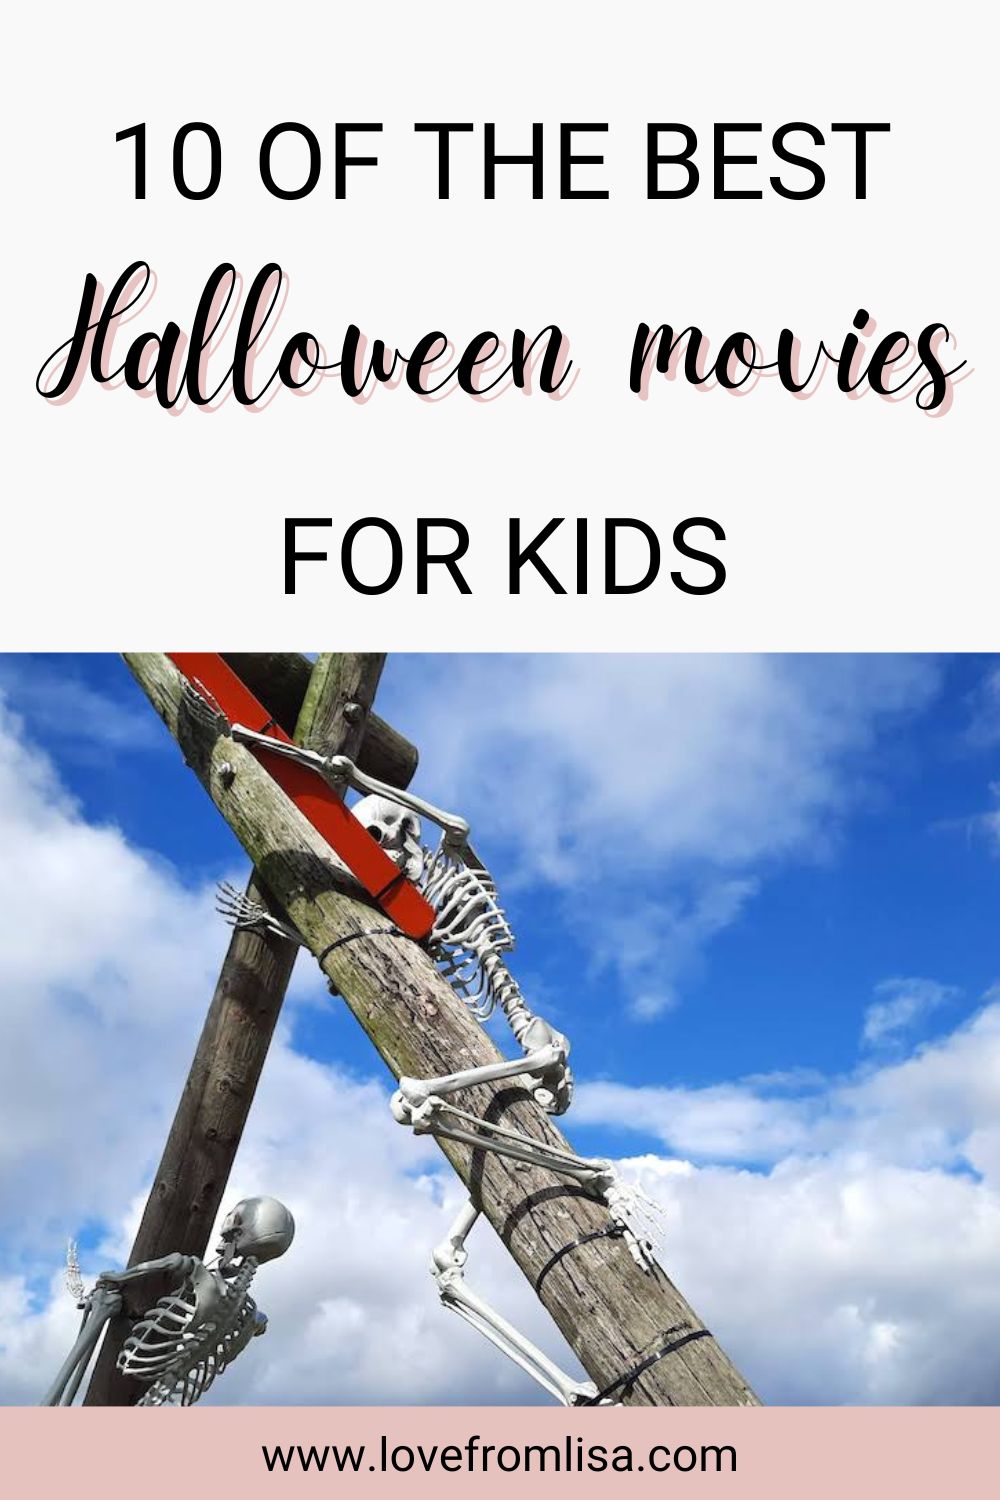 10 of the best Halloween movies for kids